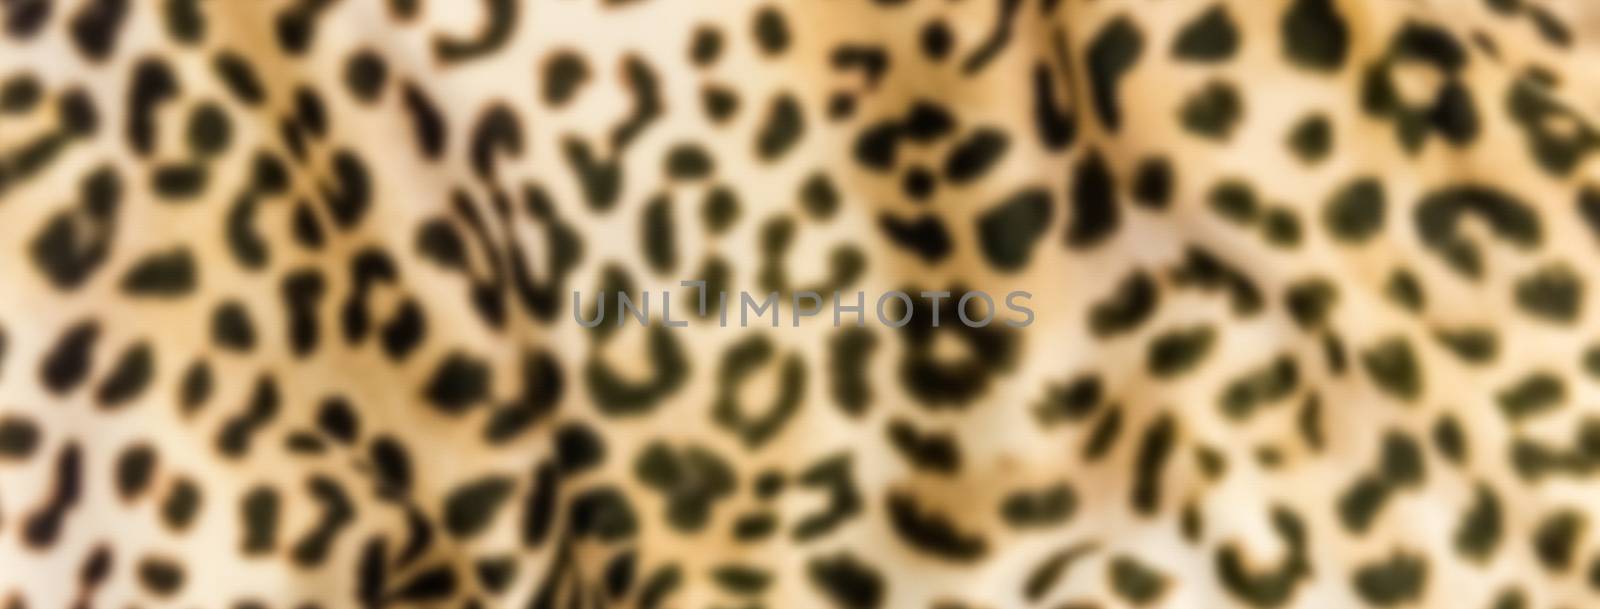 Defocused background of a fabric texture by marcorubino